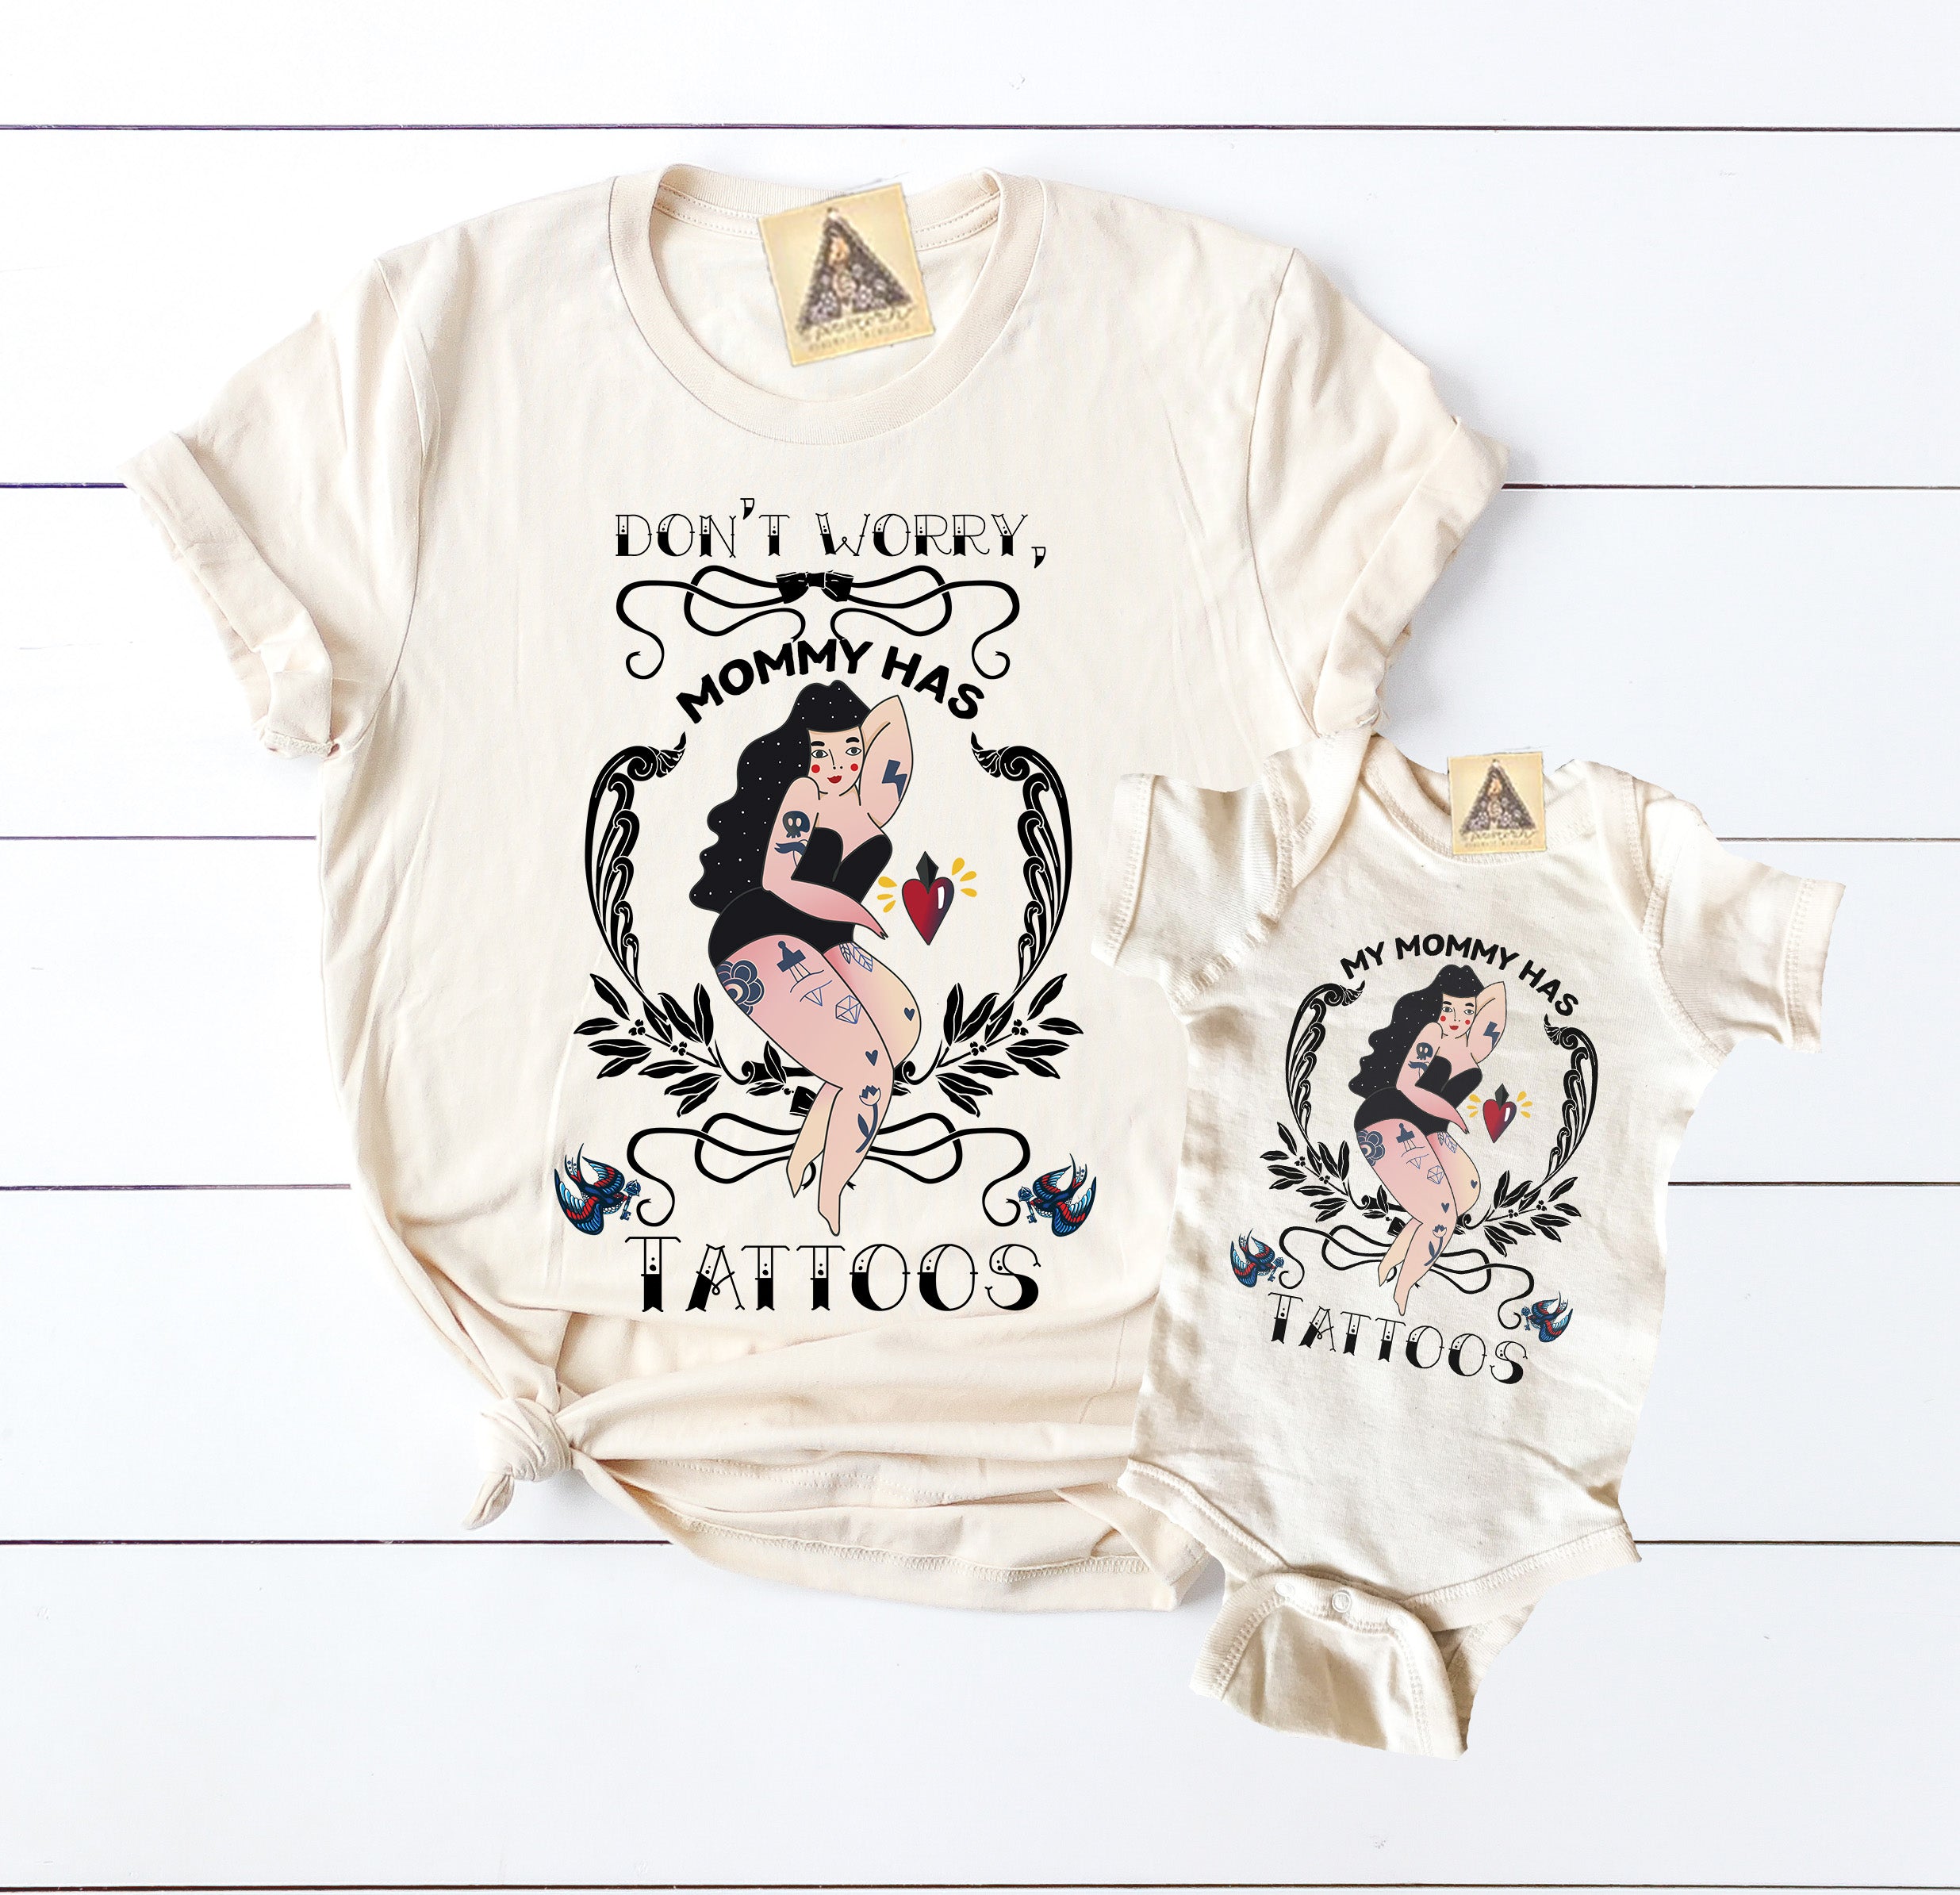 « DON'T WORRY, MOMMY HAS TATTOOS » MOMMY & ME // Unisex Cream Tee + Bodysuit